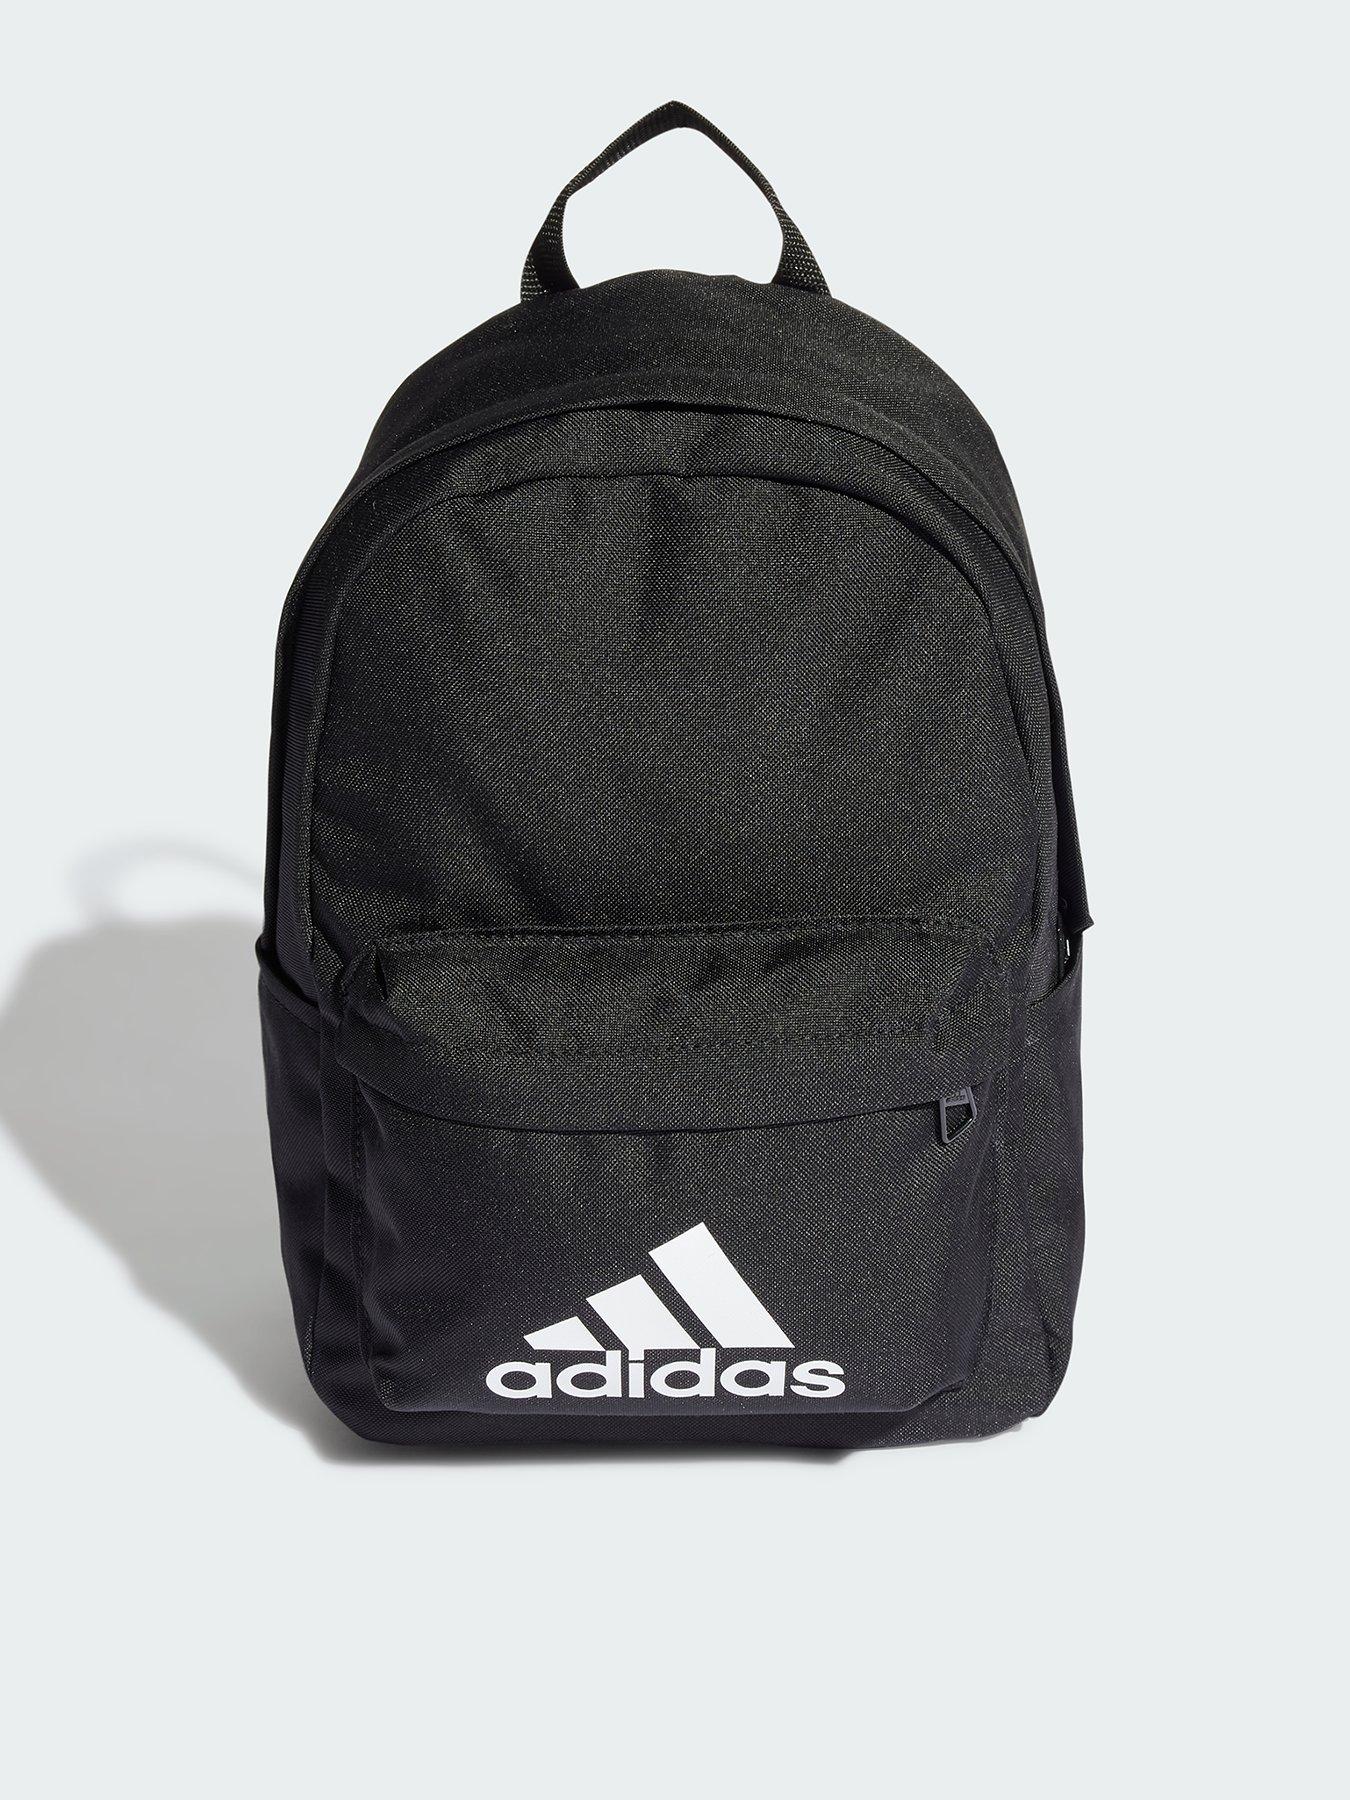 adidas Younger Kids Back To School Backpack Black/White Very Ireland